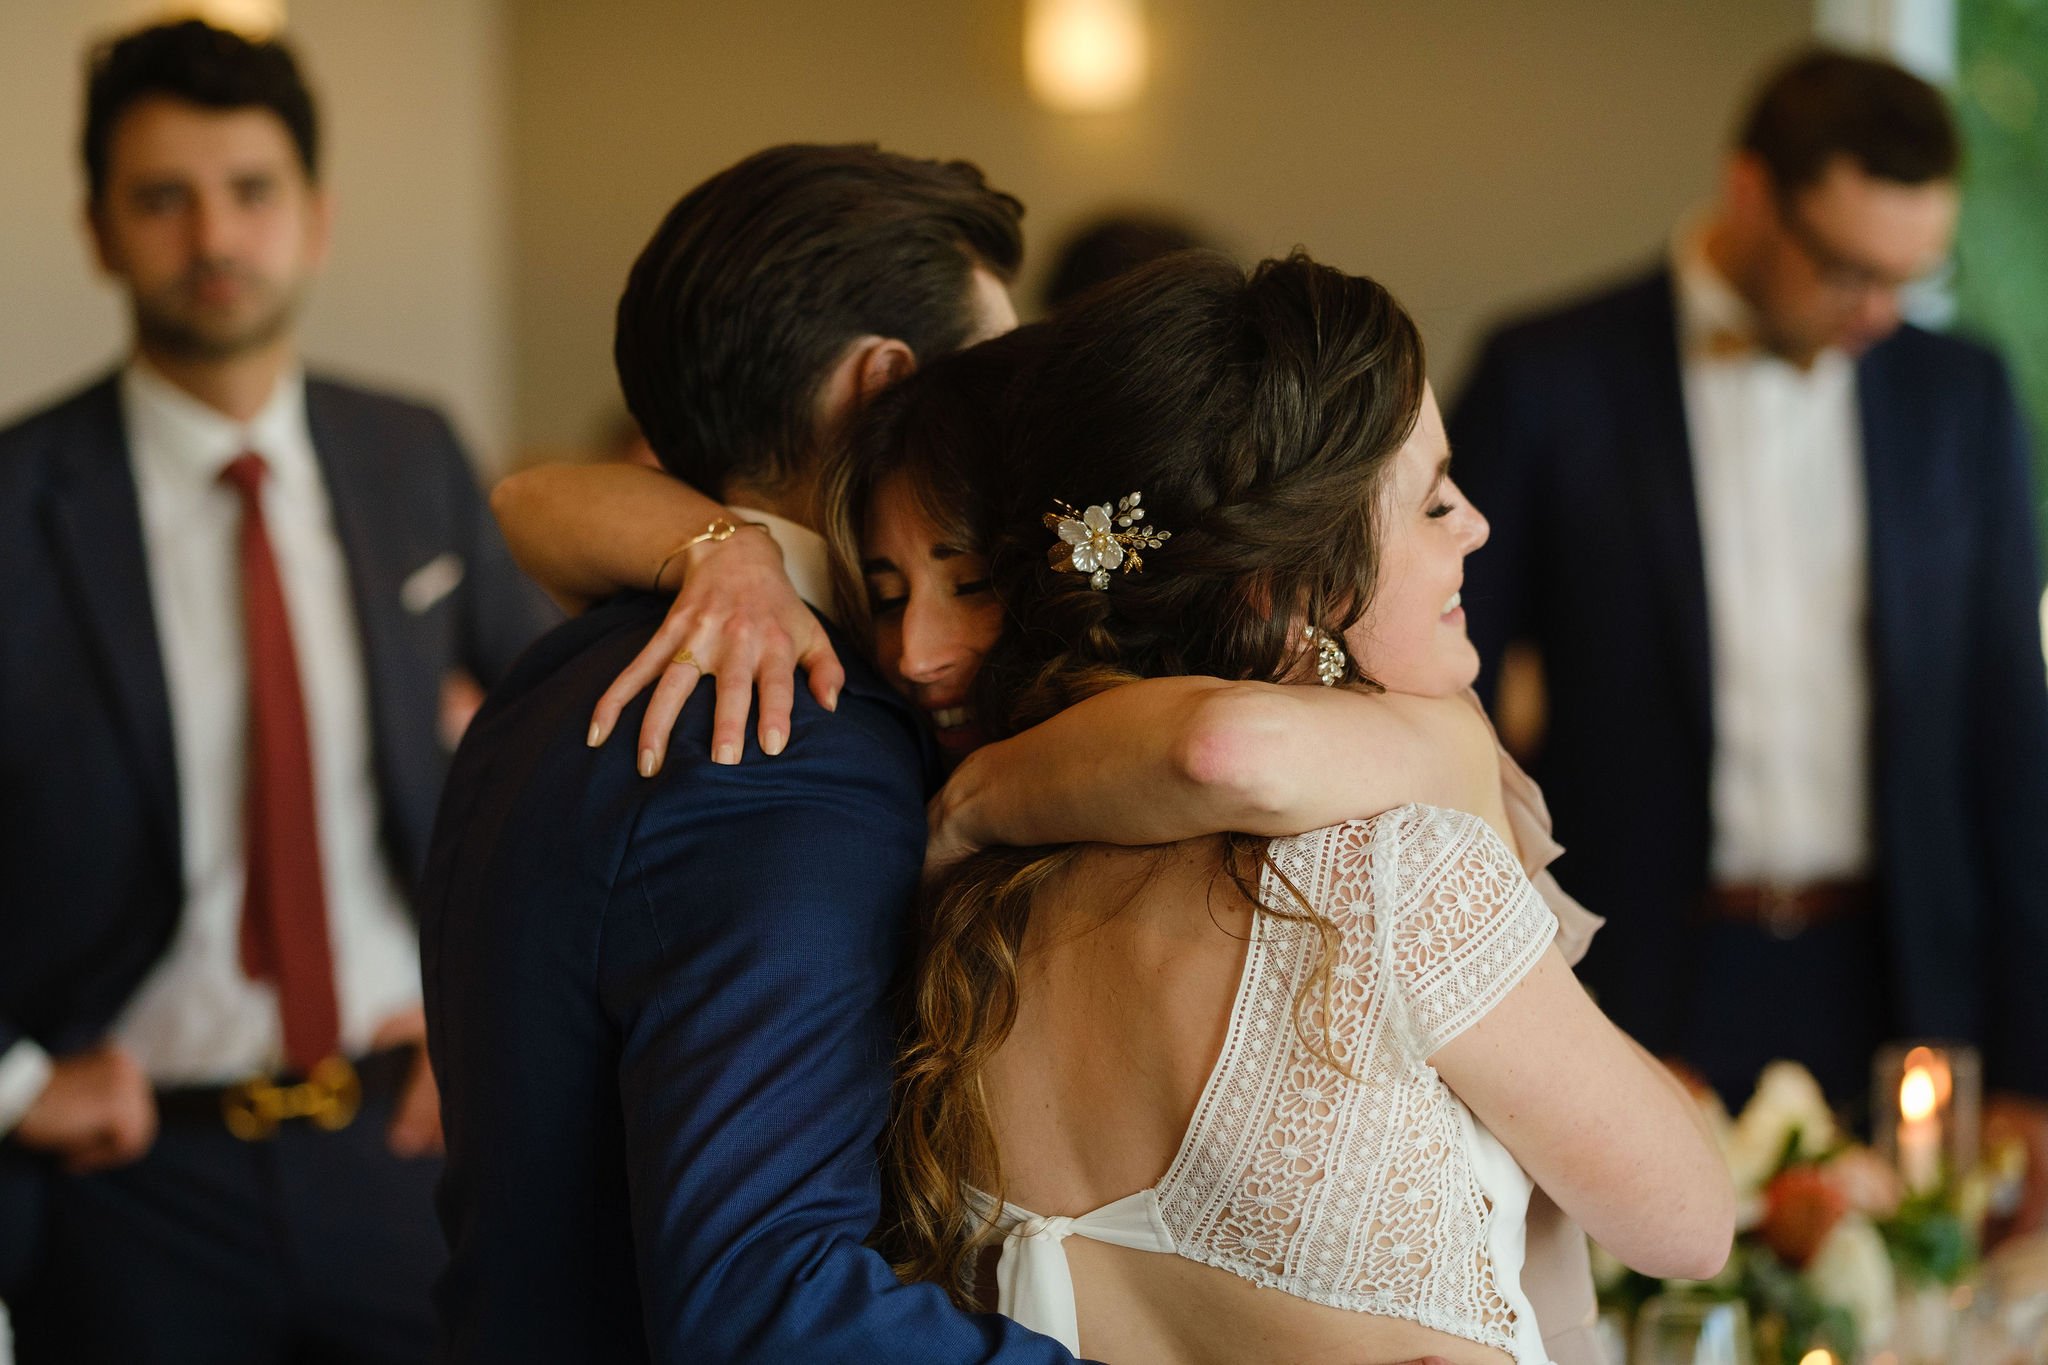  people hugging at a wedding 